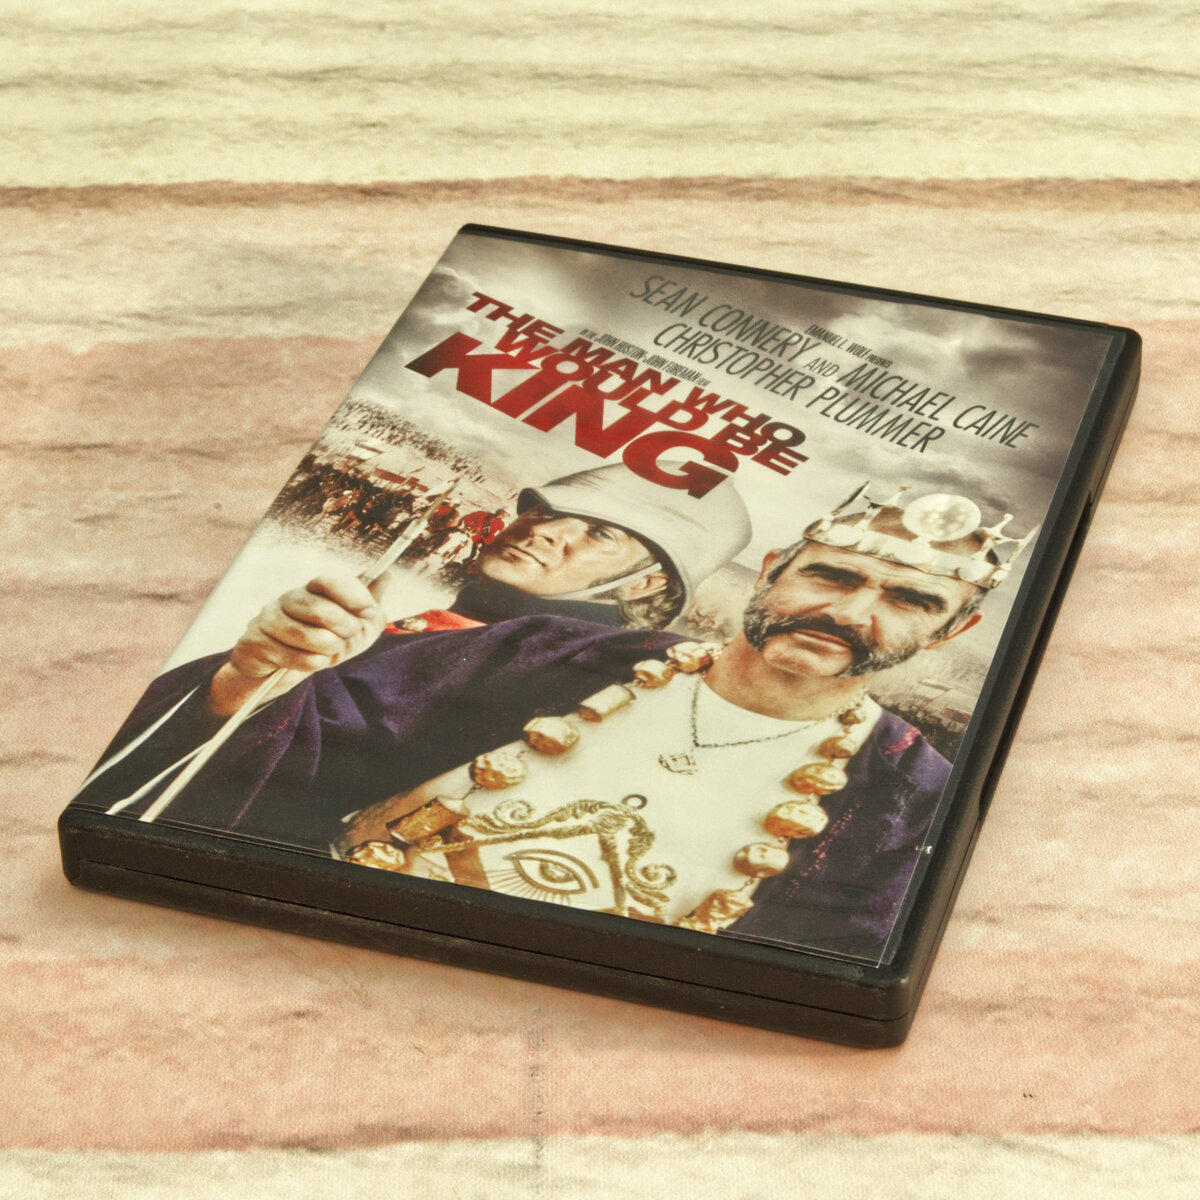 The Man Who Would Be King Movie DVD